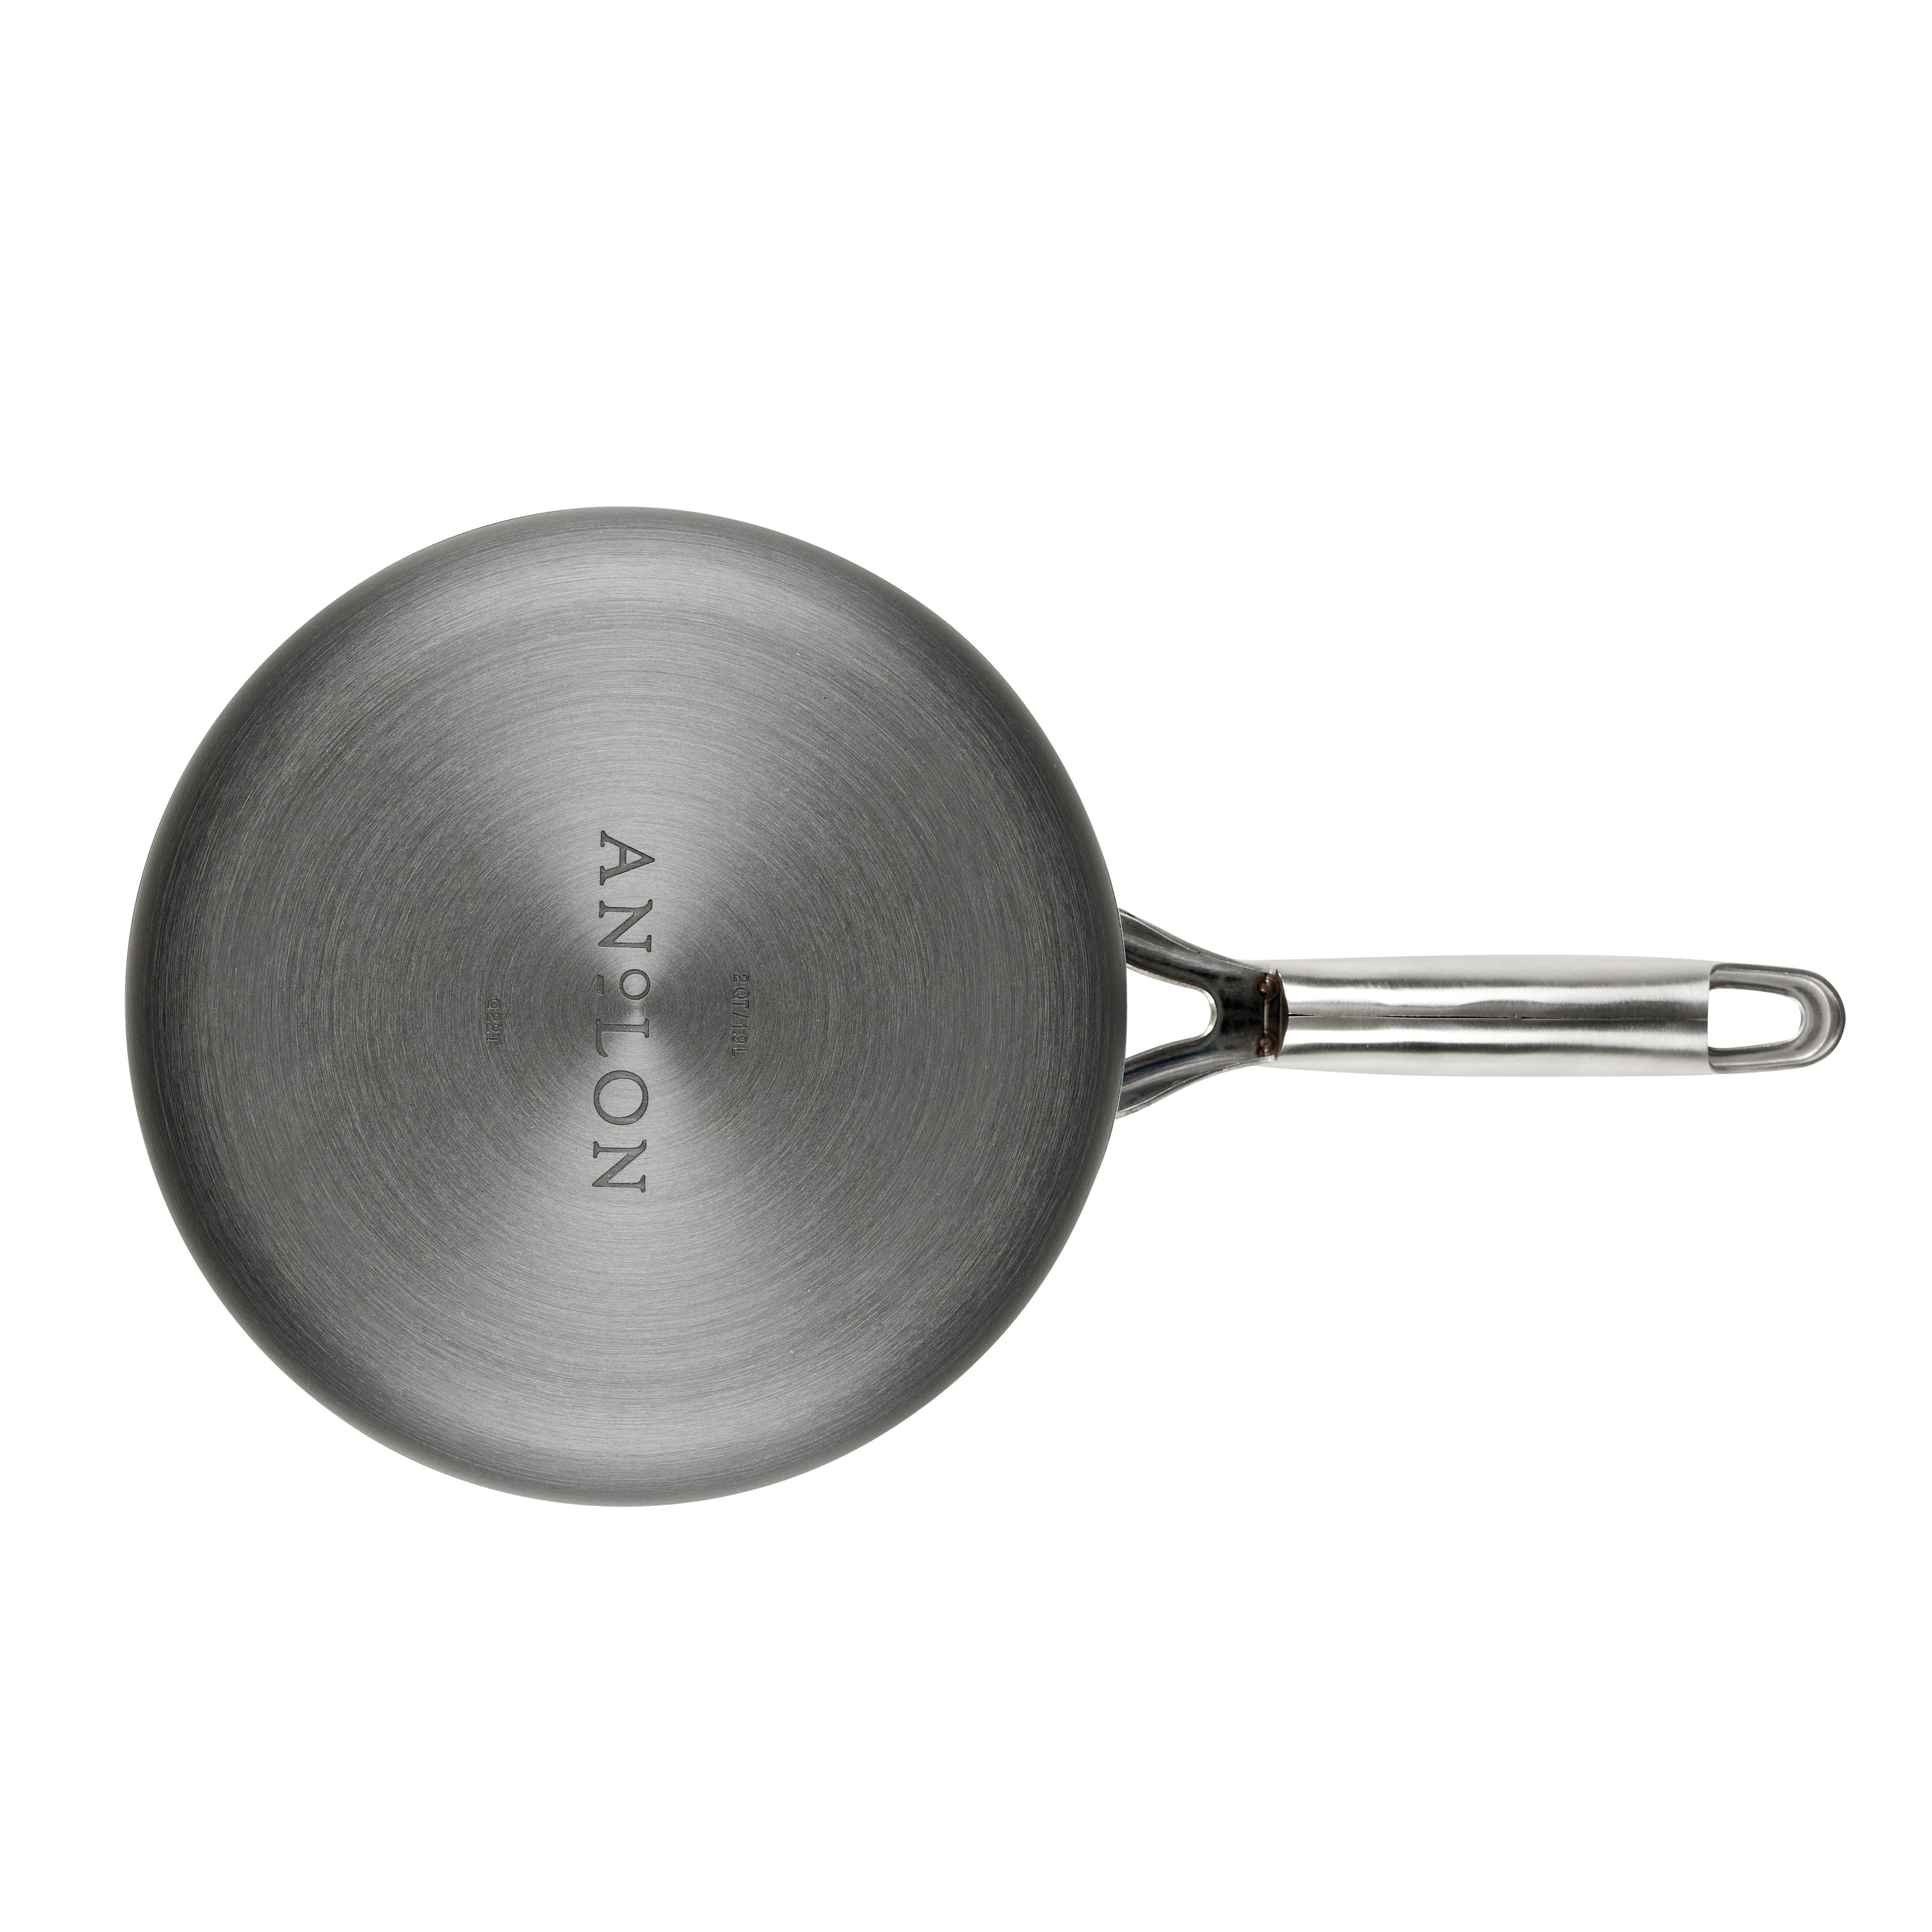 https://ak1.ostkcdn.com/images/products/is/images/direct/7034a25323e0adc84a50f158293d3d0ef0157822/Anolon-Achieve-Hard-Anodized-Nonstick-Sauce-Pan-with-Lid%2C-2-Quart%2C-Teal.jpg